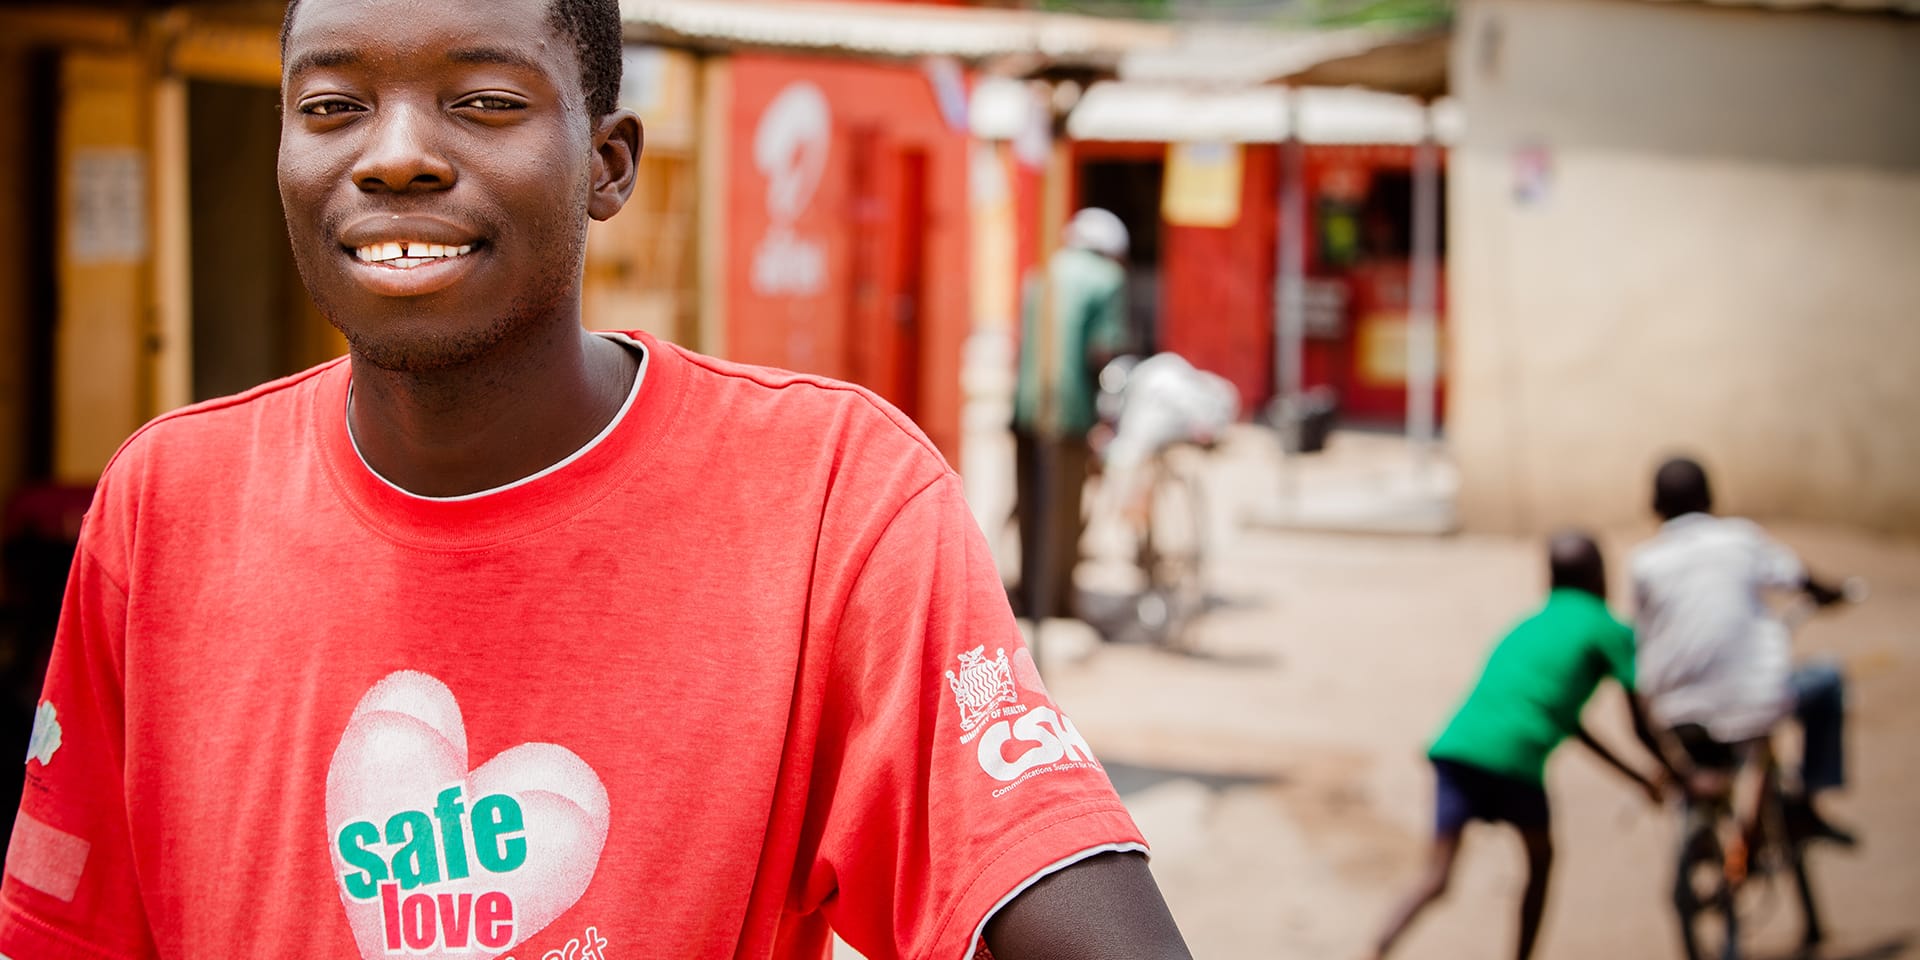 Image of a smiling young man on a busy street wearing a red t-shirt that says 